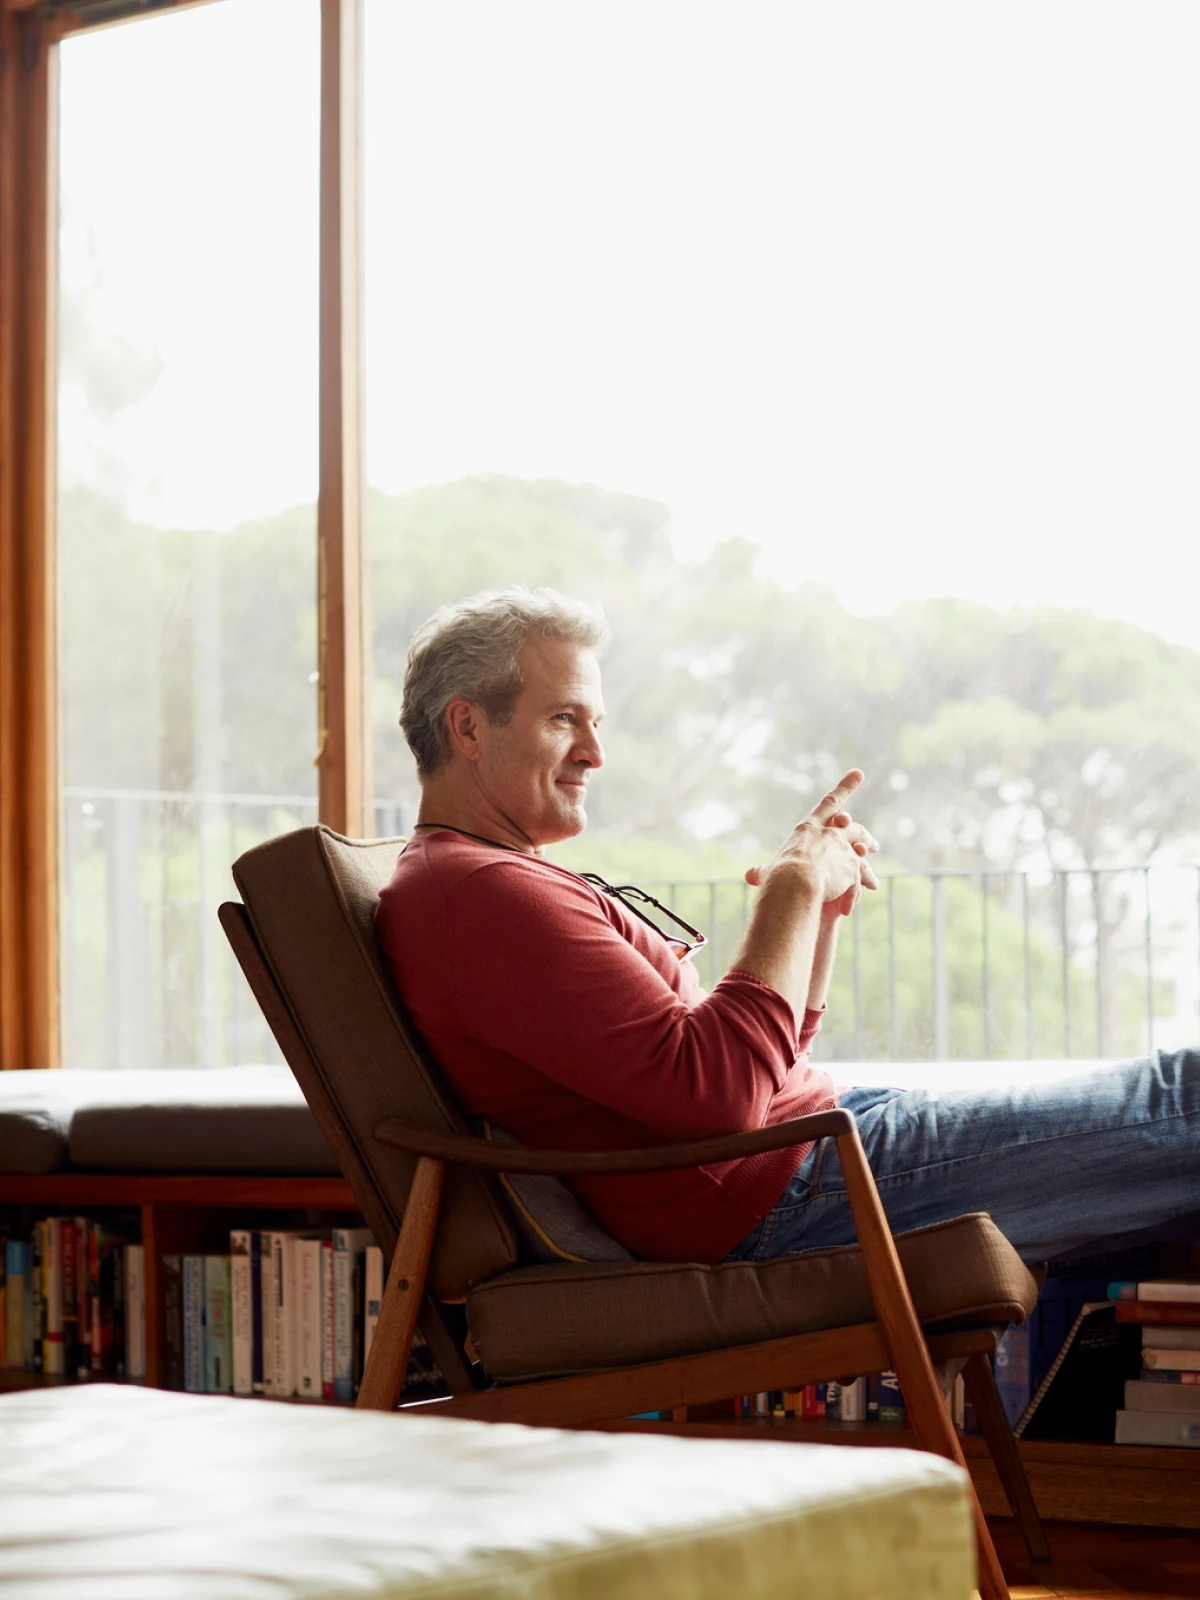 Mature man relaxing by the window.